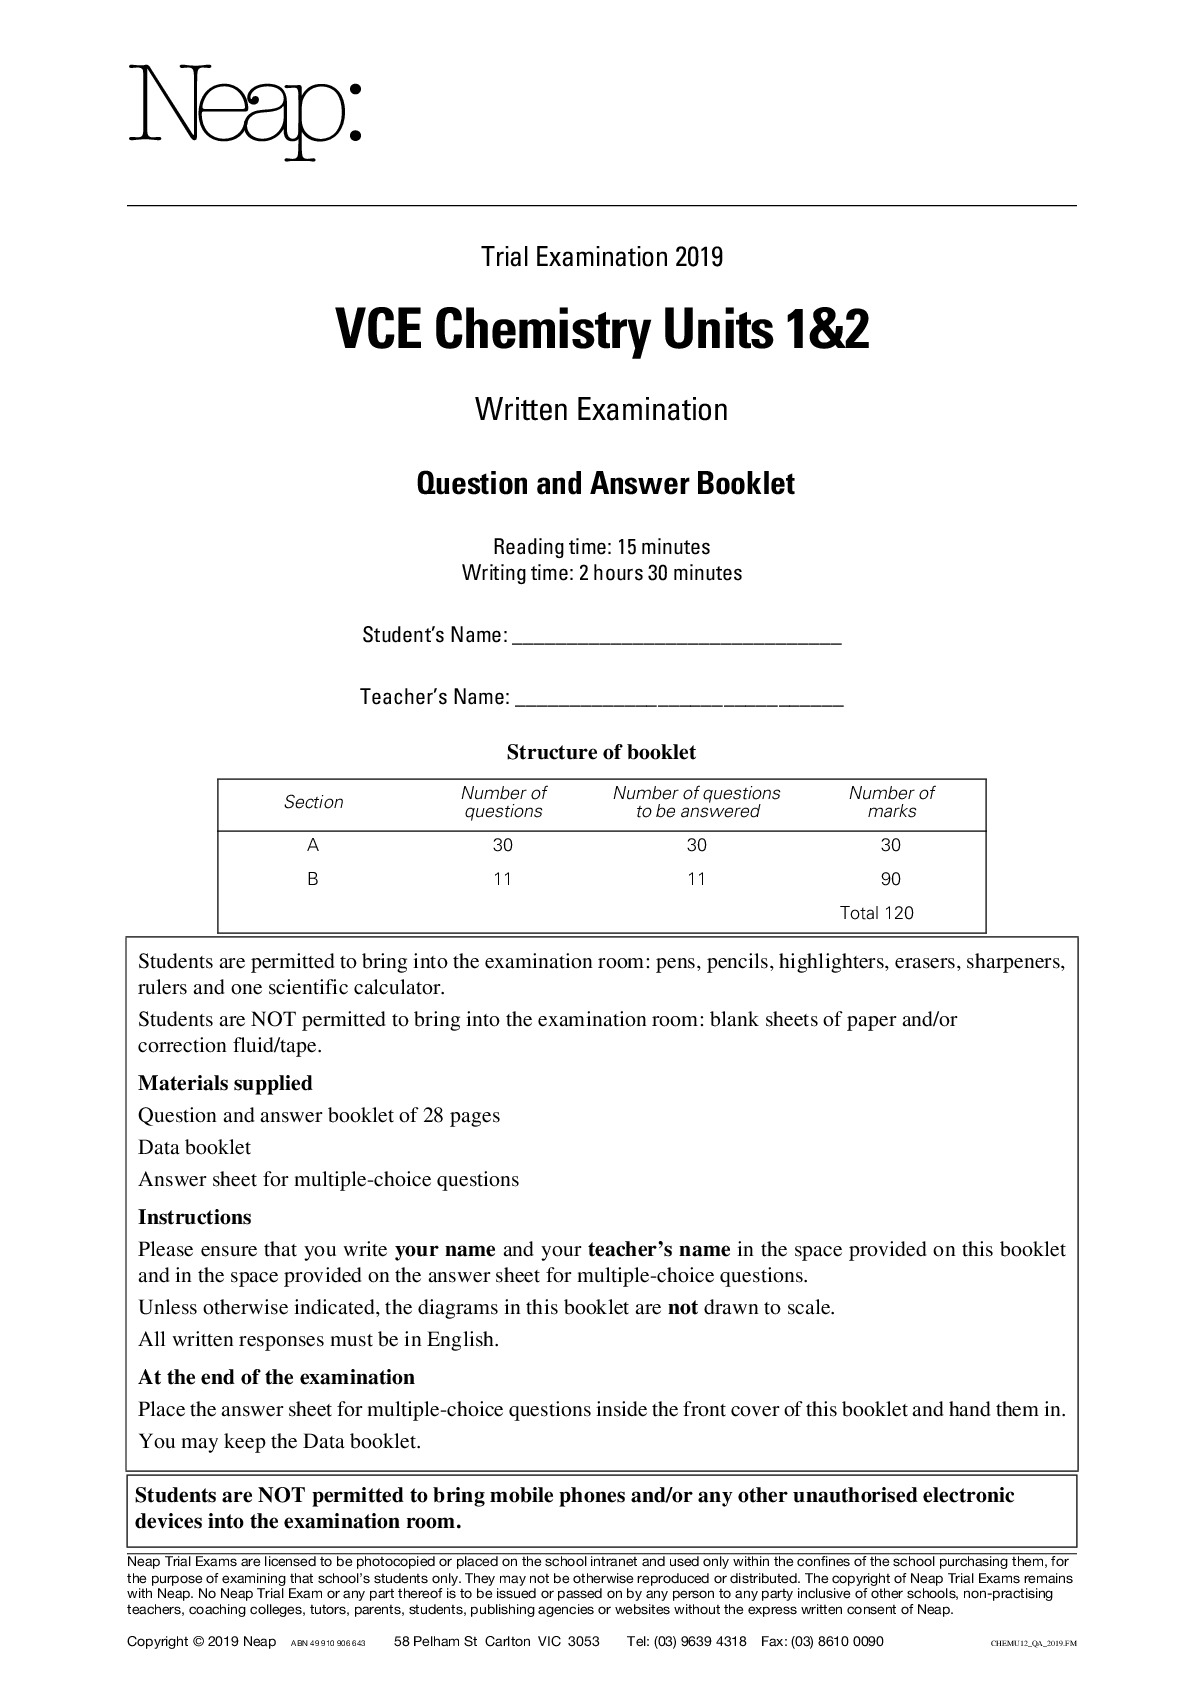 NEAP_2019_Units_1_2_Question_and_Answer_Booklet.pdf